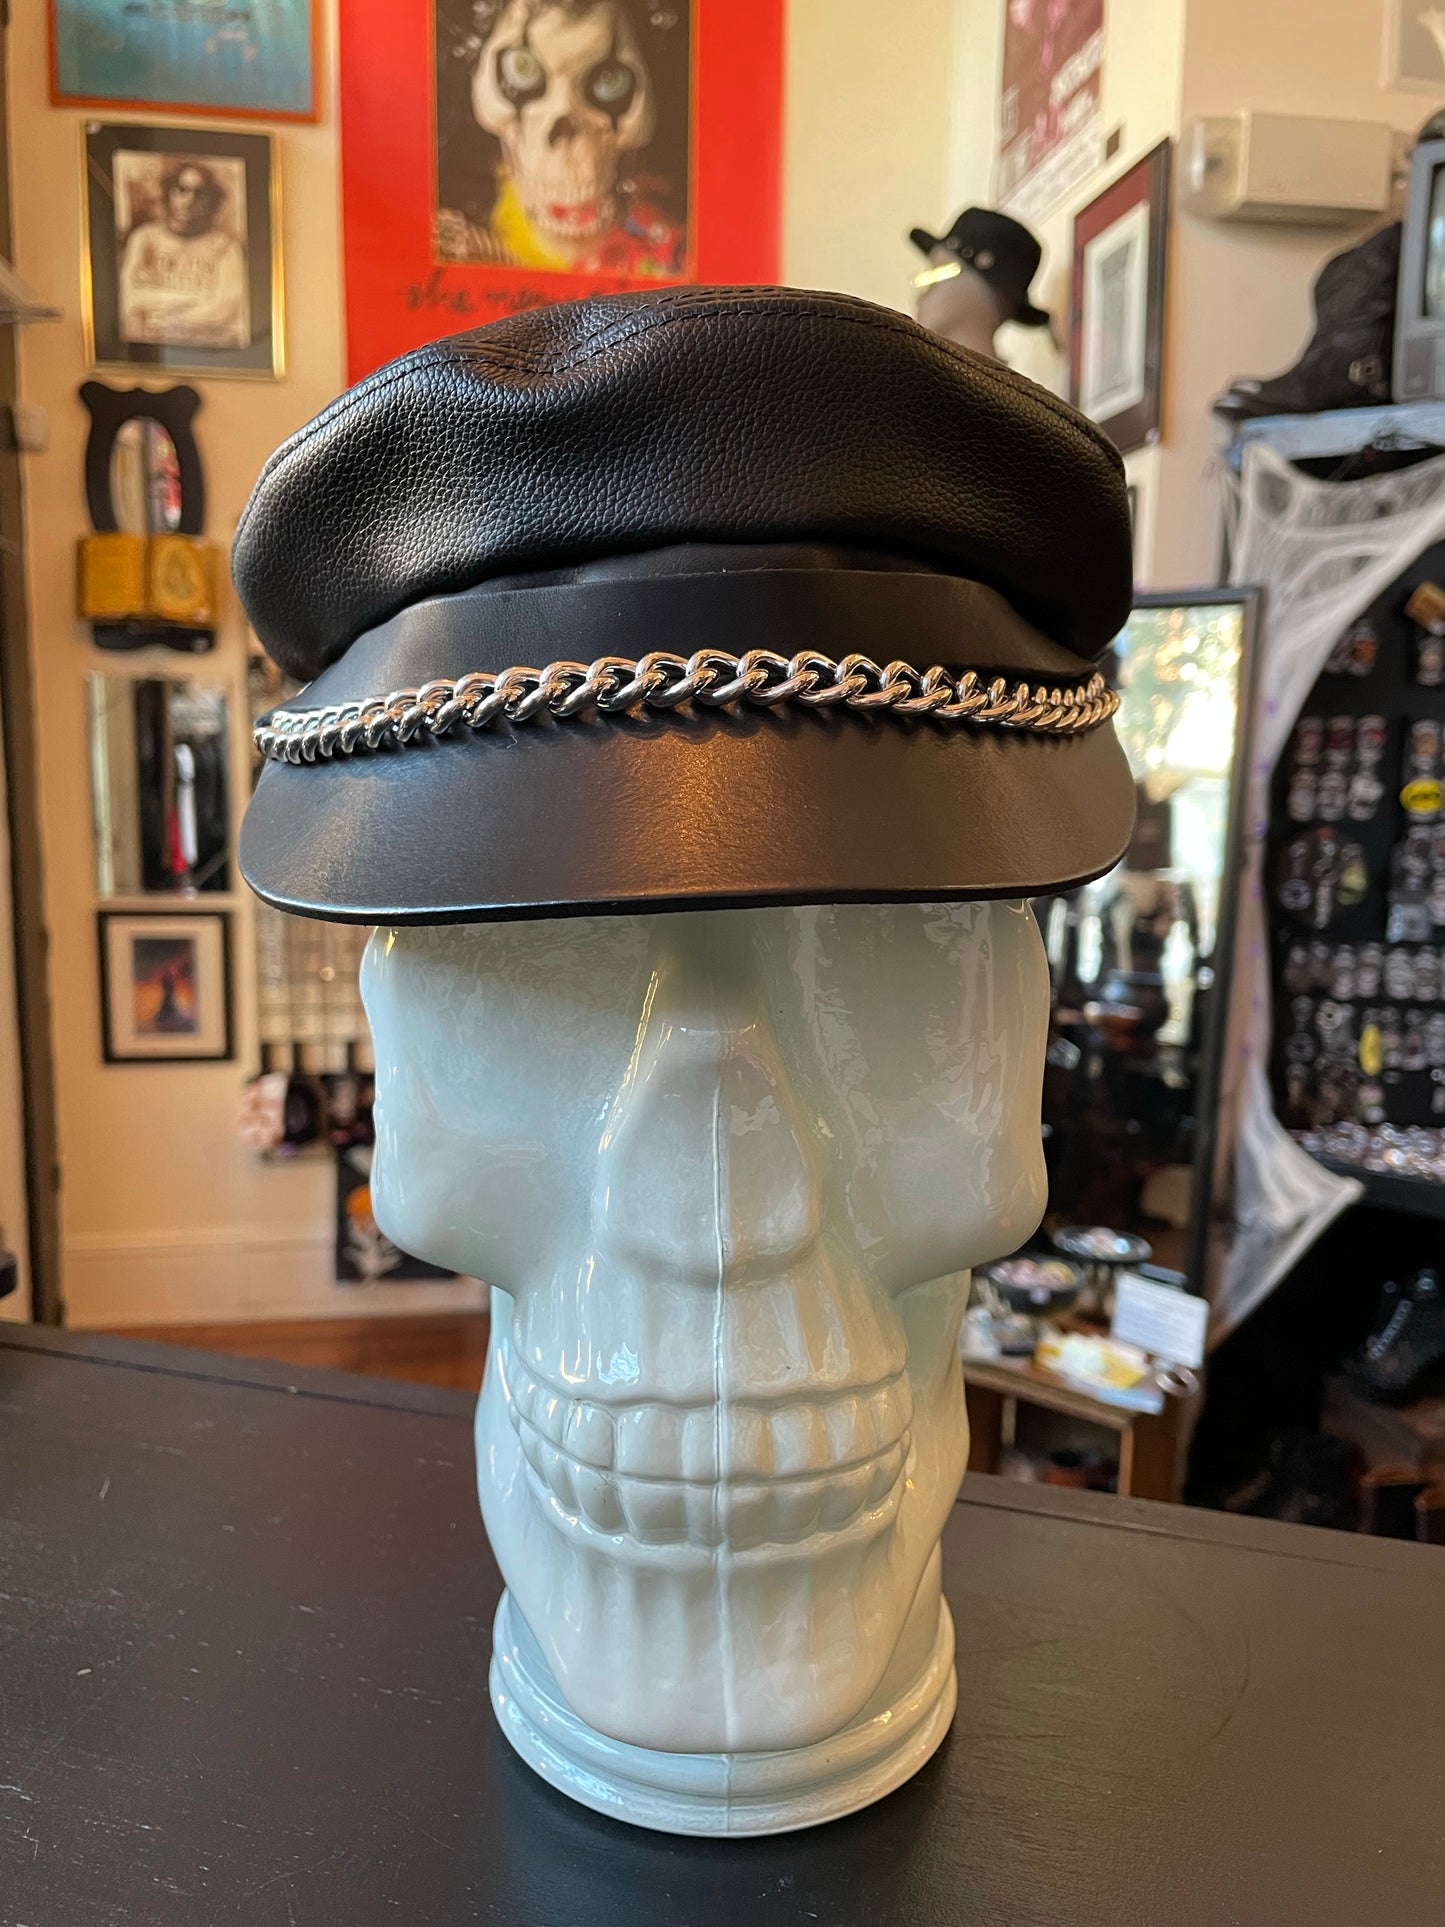 NWT Classic Leather and Chain Biker Hat